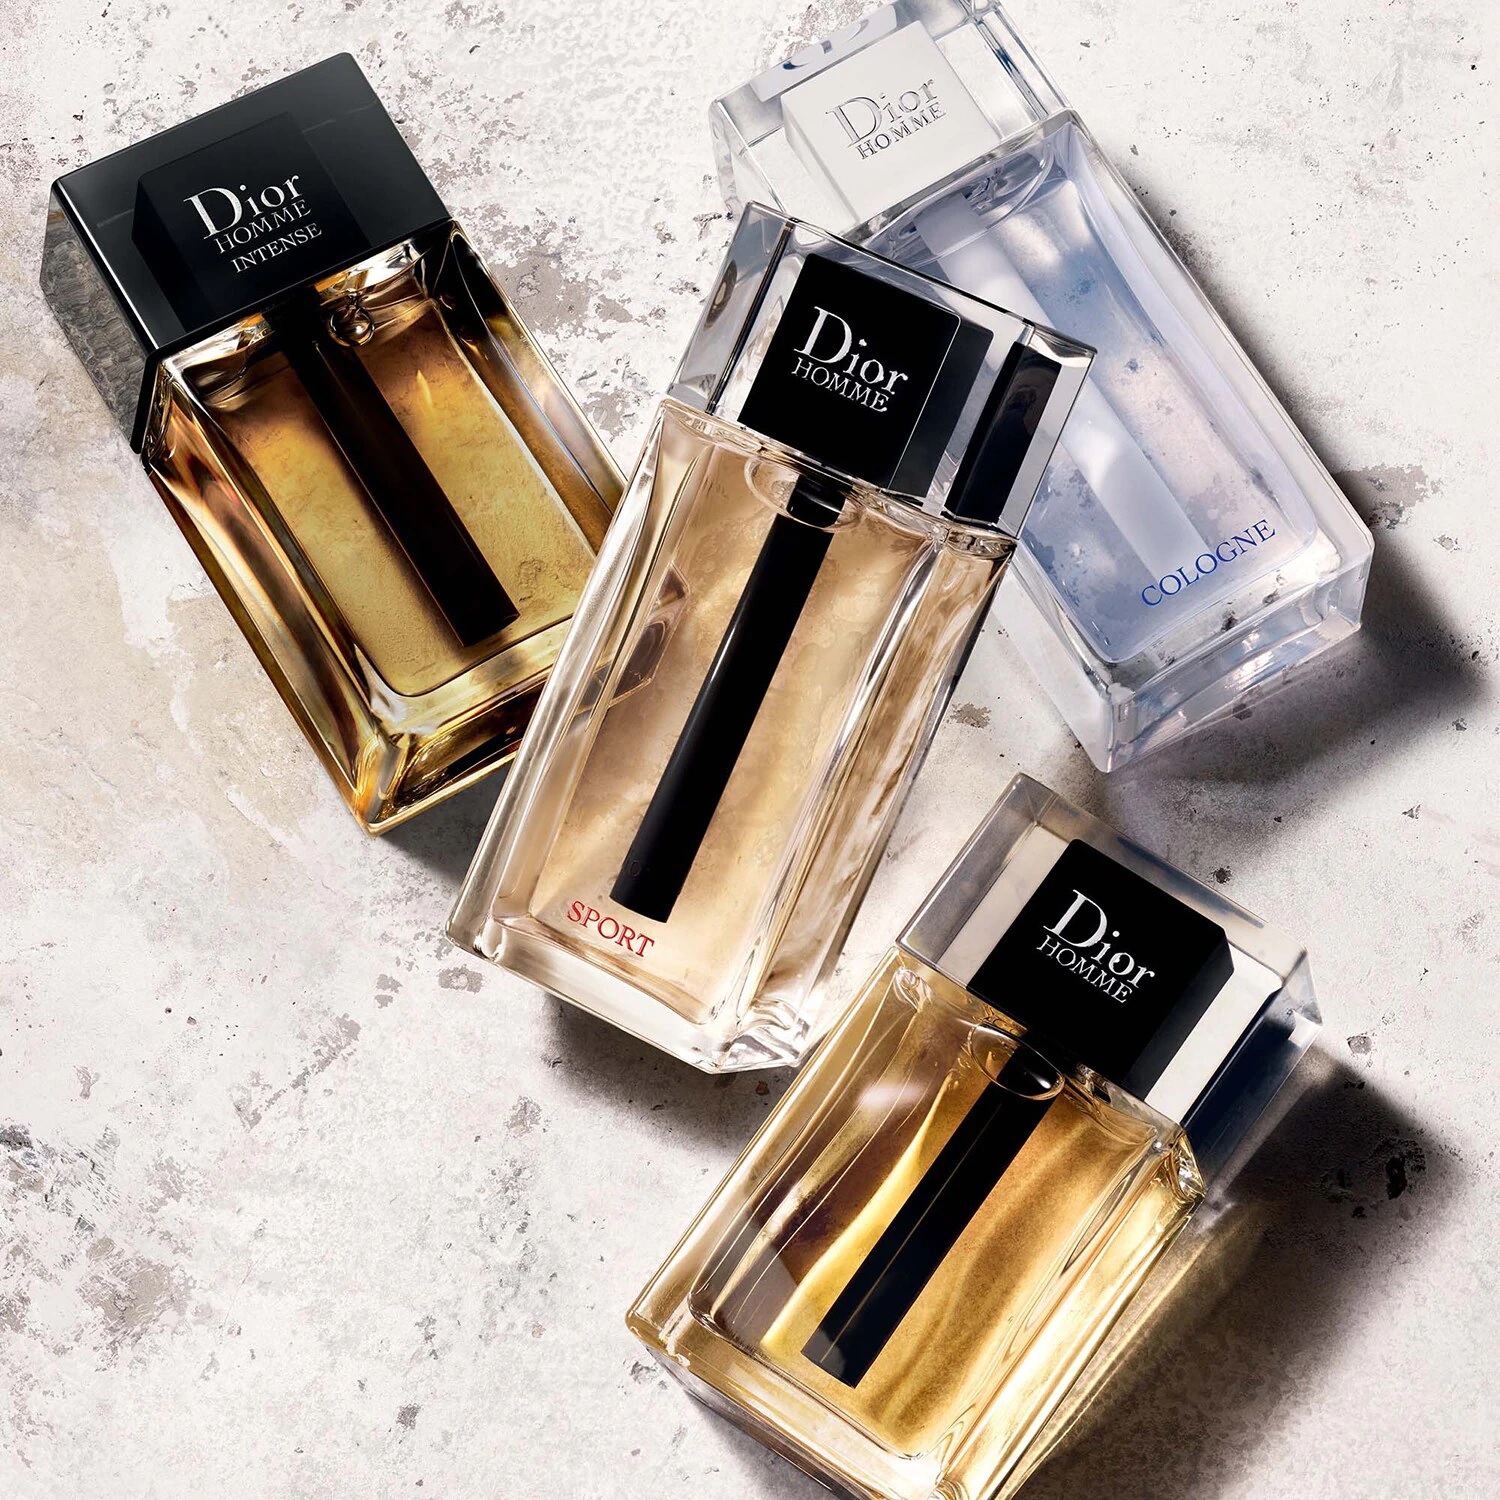 Dior Homme Cologne Eau de Toilette Review  The Happy Sloths Beauty  Makeup and Skincare Blog with Reviews and Swatches